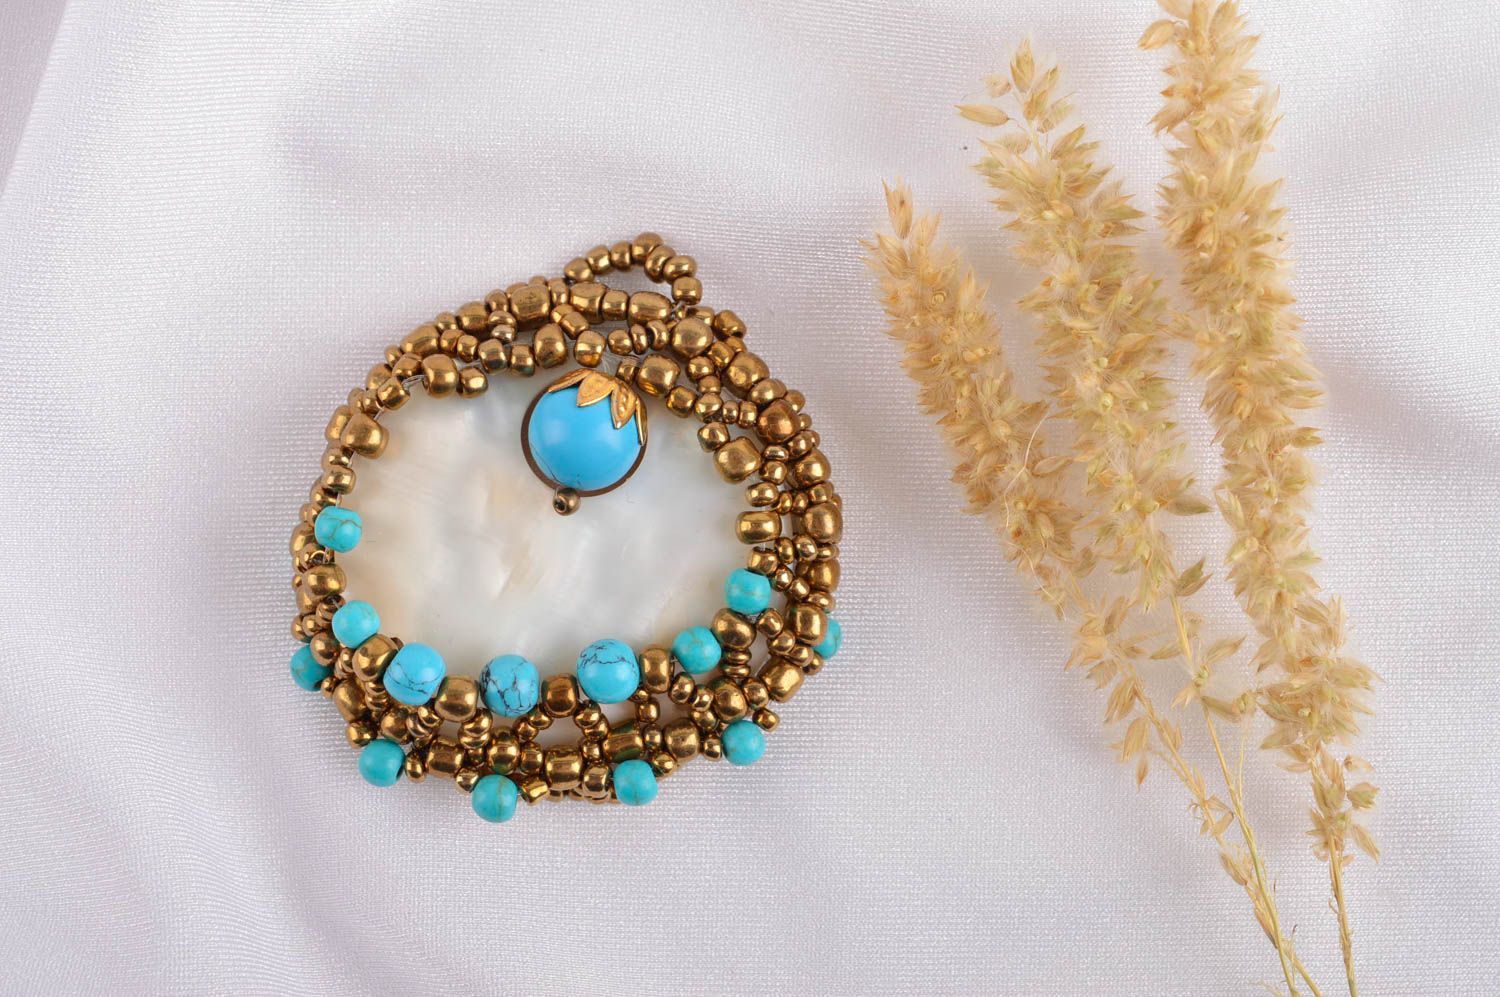 Handmade brooch designer accessories vintage brooch unique jewelry gifts for her photo 1